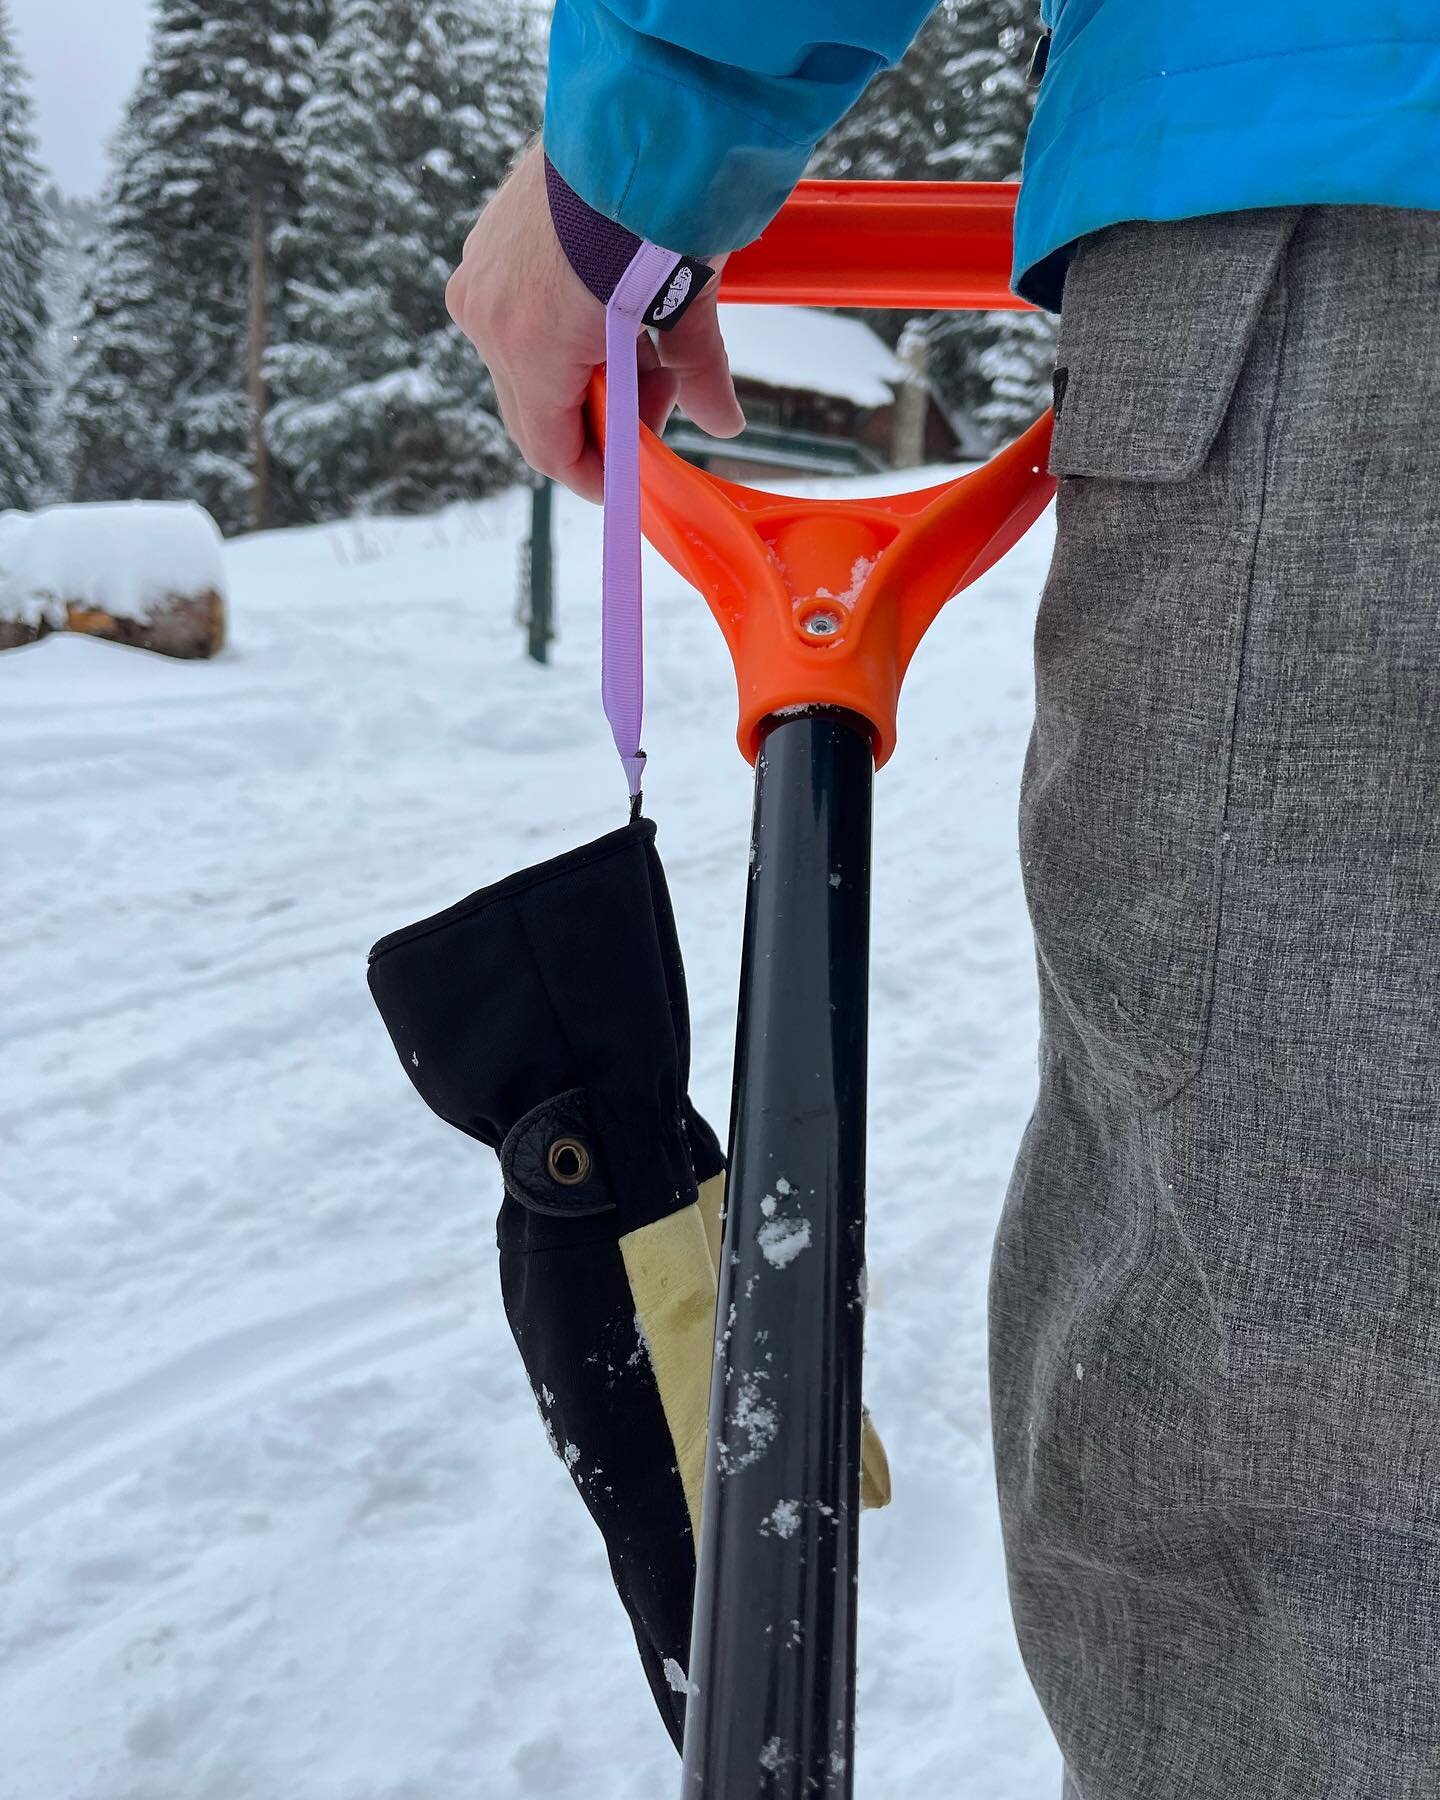 The winter season here in Utah is in full swing! Start the 2023 off right with a pair of Tough Cuff glove leashes! No more squishing gloves underneath your legs or into a jacket pocket. Get your handcrafted glove leash that put your comfort and conve